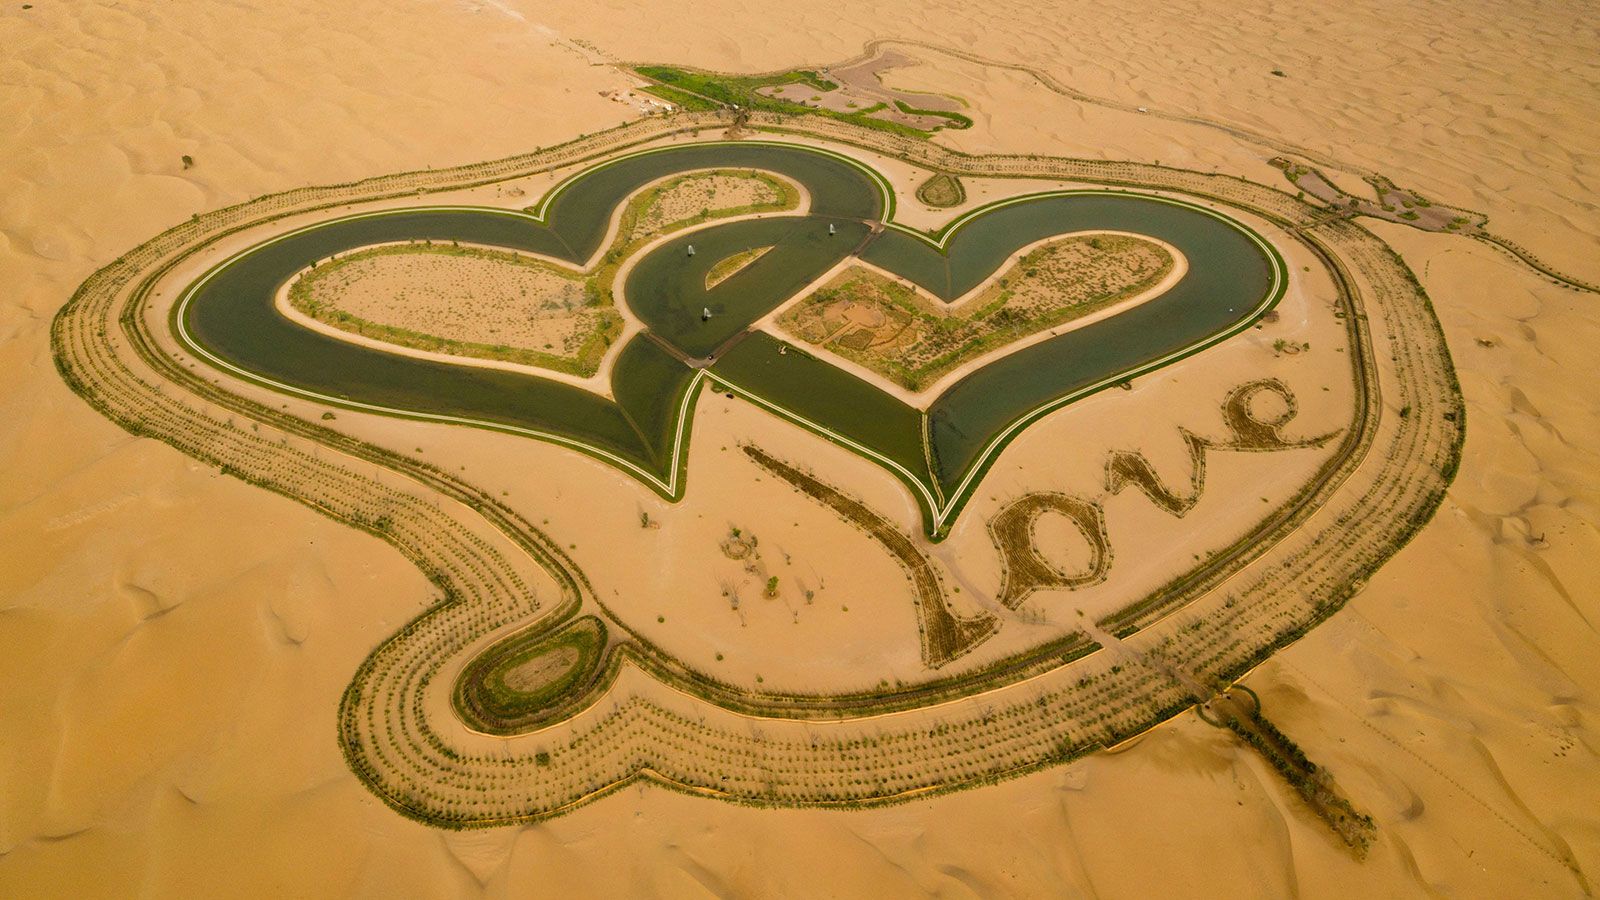 The Love Lake, with its distinctive design, stands as one of the most magnificent lakes in Dubai